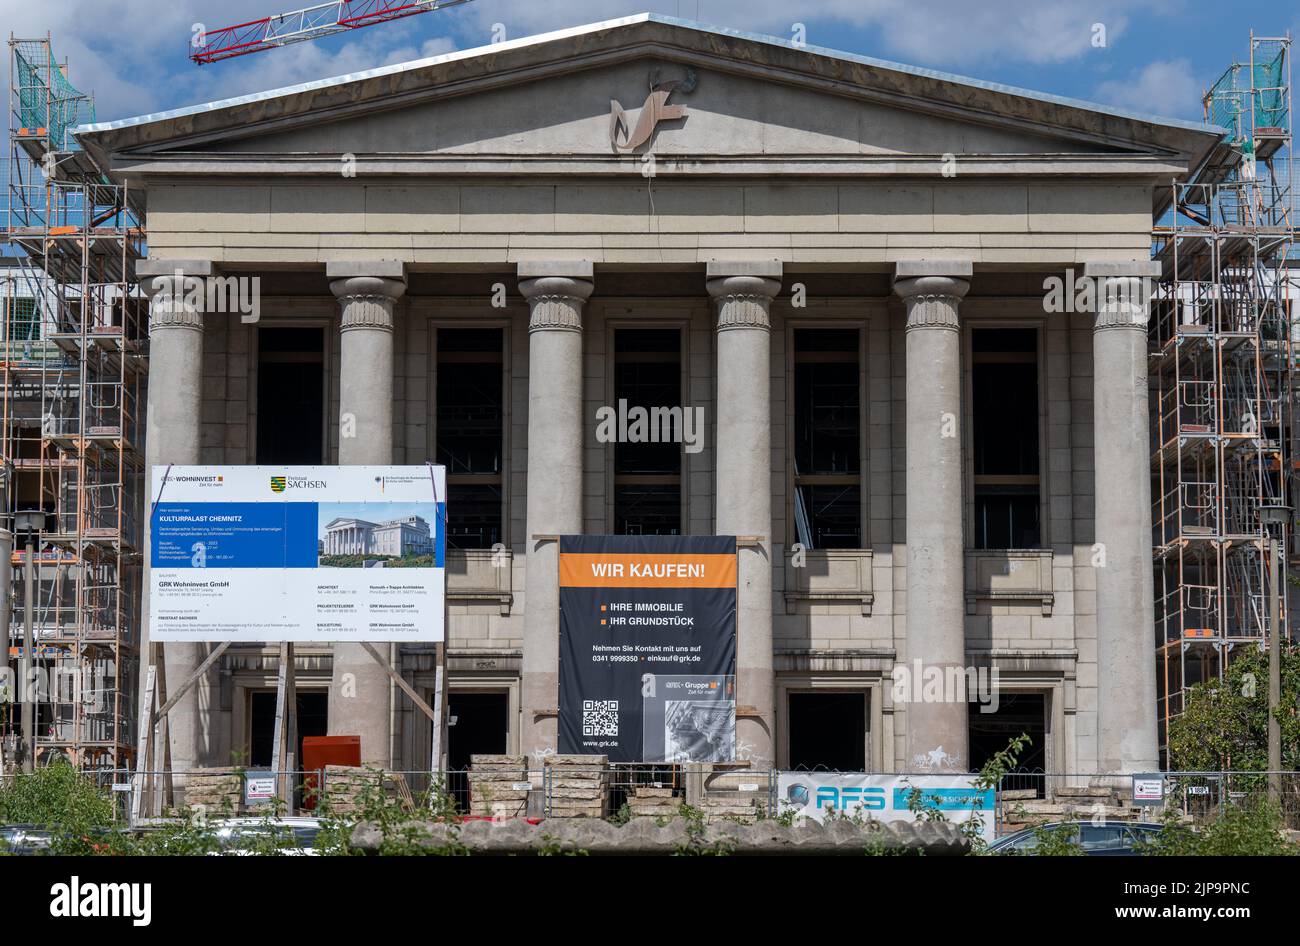 16 August 2022, Saxony, Chemnitz: Construction work is underway on the former Palace of Culture in Chemnitz. The cultural monument will be renovated at a cost of 25 million euros by summer 2024. The Leipzig-based construction company GRK Immobilien is building 64 apartments with around 5700 square meters in the building. GRK specializes in the renovation of listed buildings and purchased the neoclassical monumental building in 2018. The Palace of Culture in Rabenstein is considered the first of its kind in the GDR. It was built on behalf of the uranium mining company Wismut and inaugurated in Stock Photo